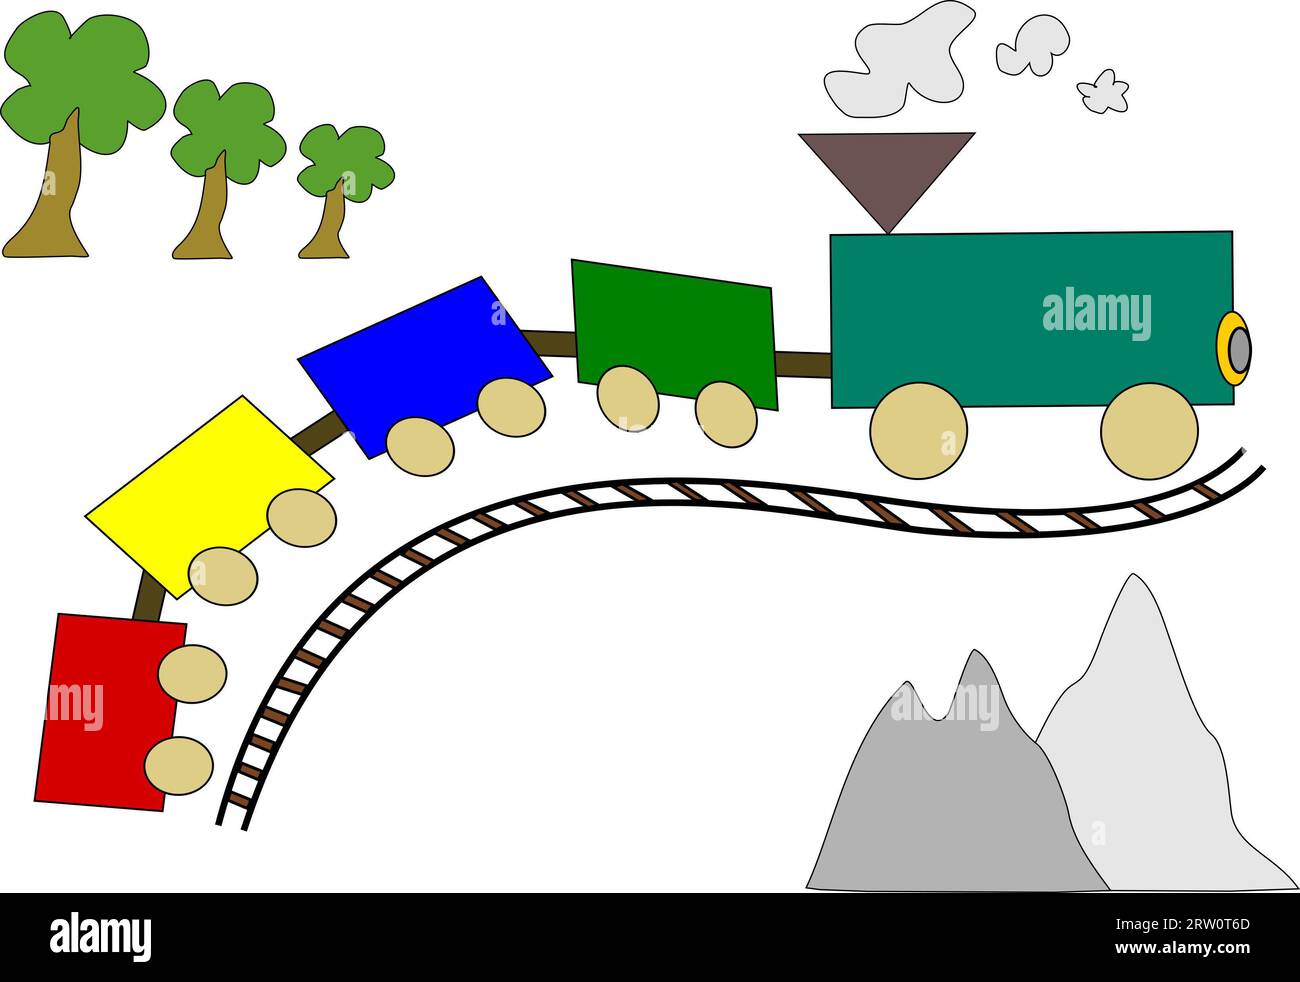 Railway journey over hill and dale, illustration Stock Photo